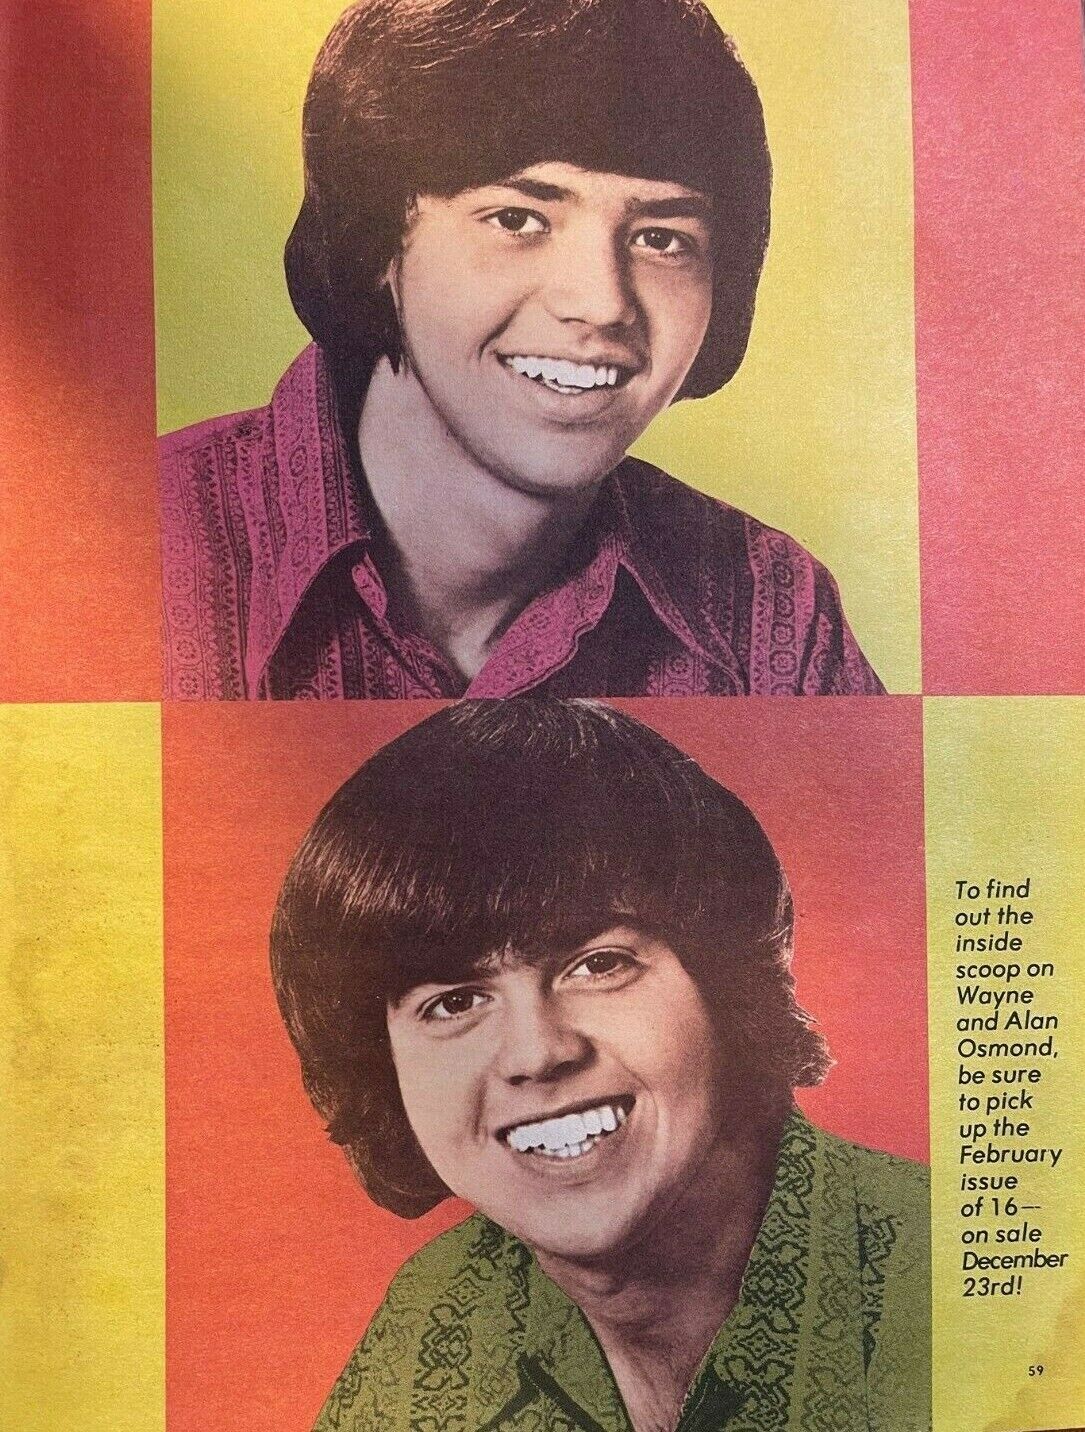 1972 Musicians Jay Osmond and Merrill Osmond The Osmond Brothers